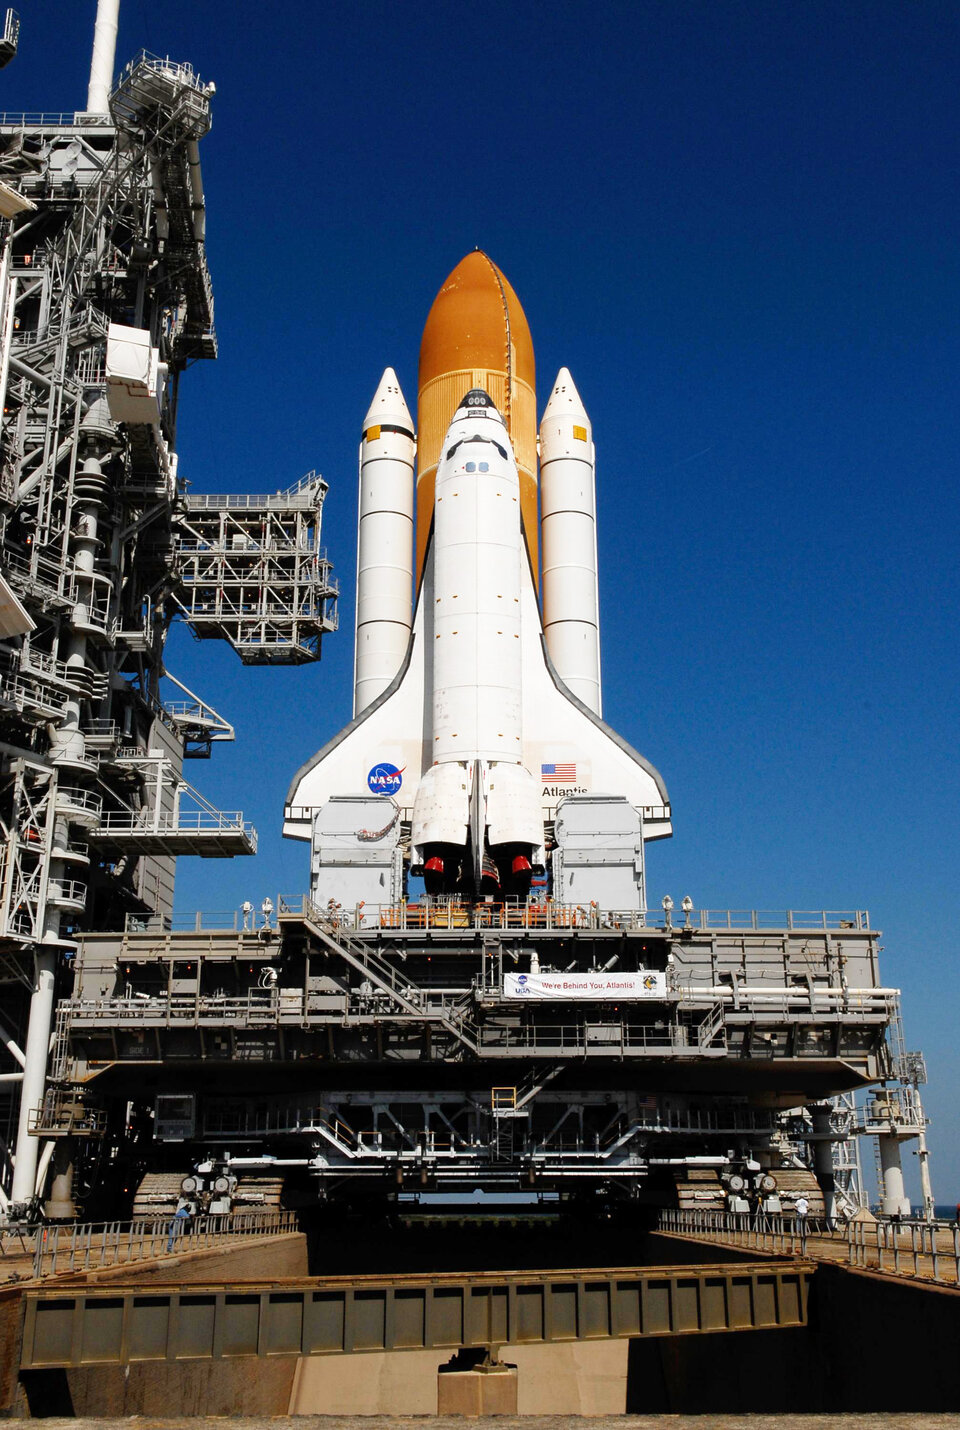 Columbus is set to launch on board Space Shuttle Atlantis on 7 February